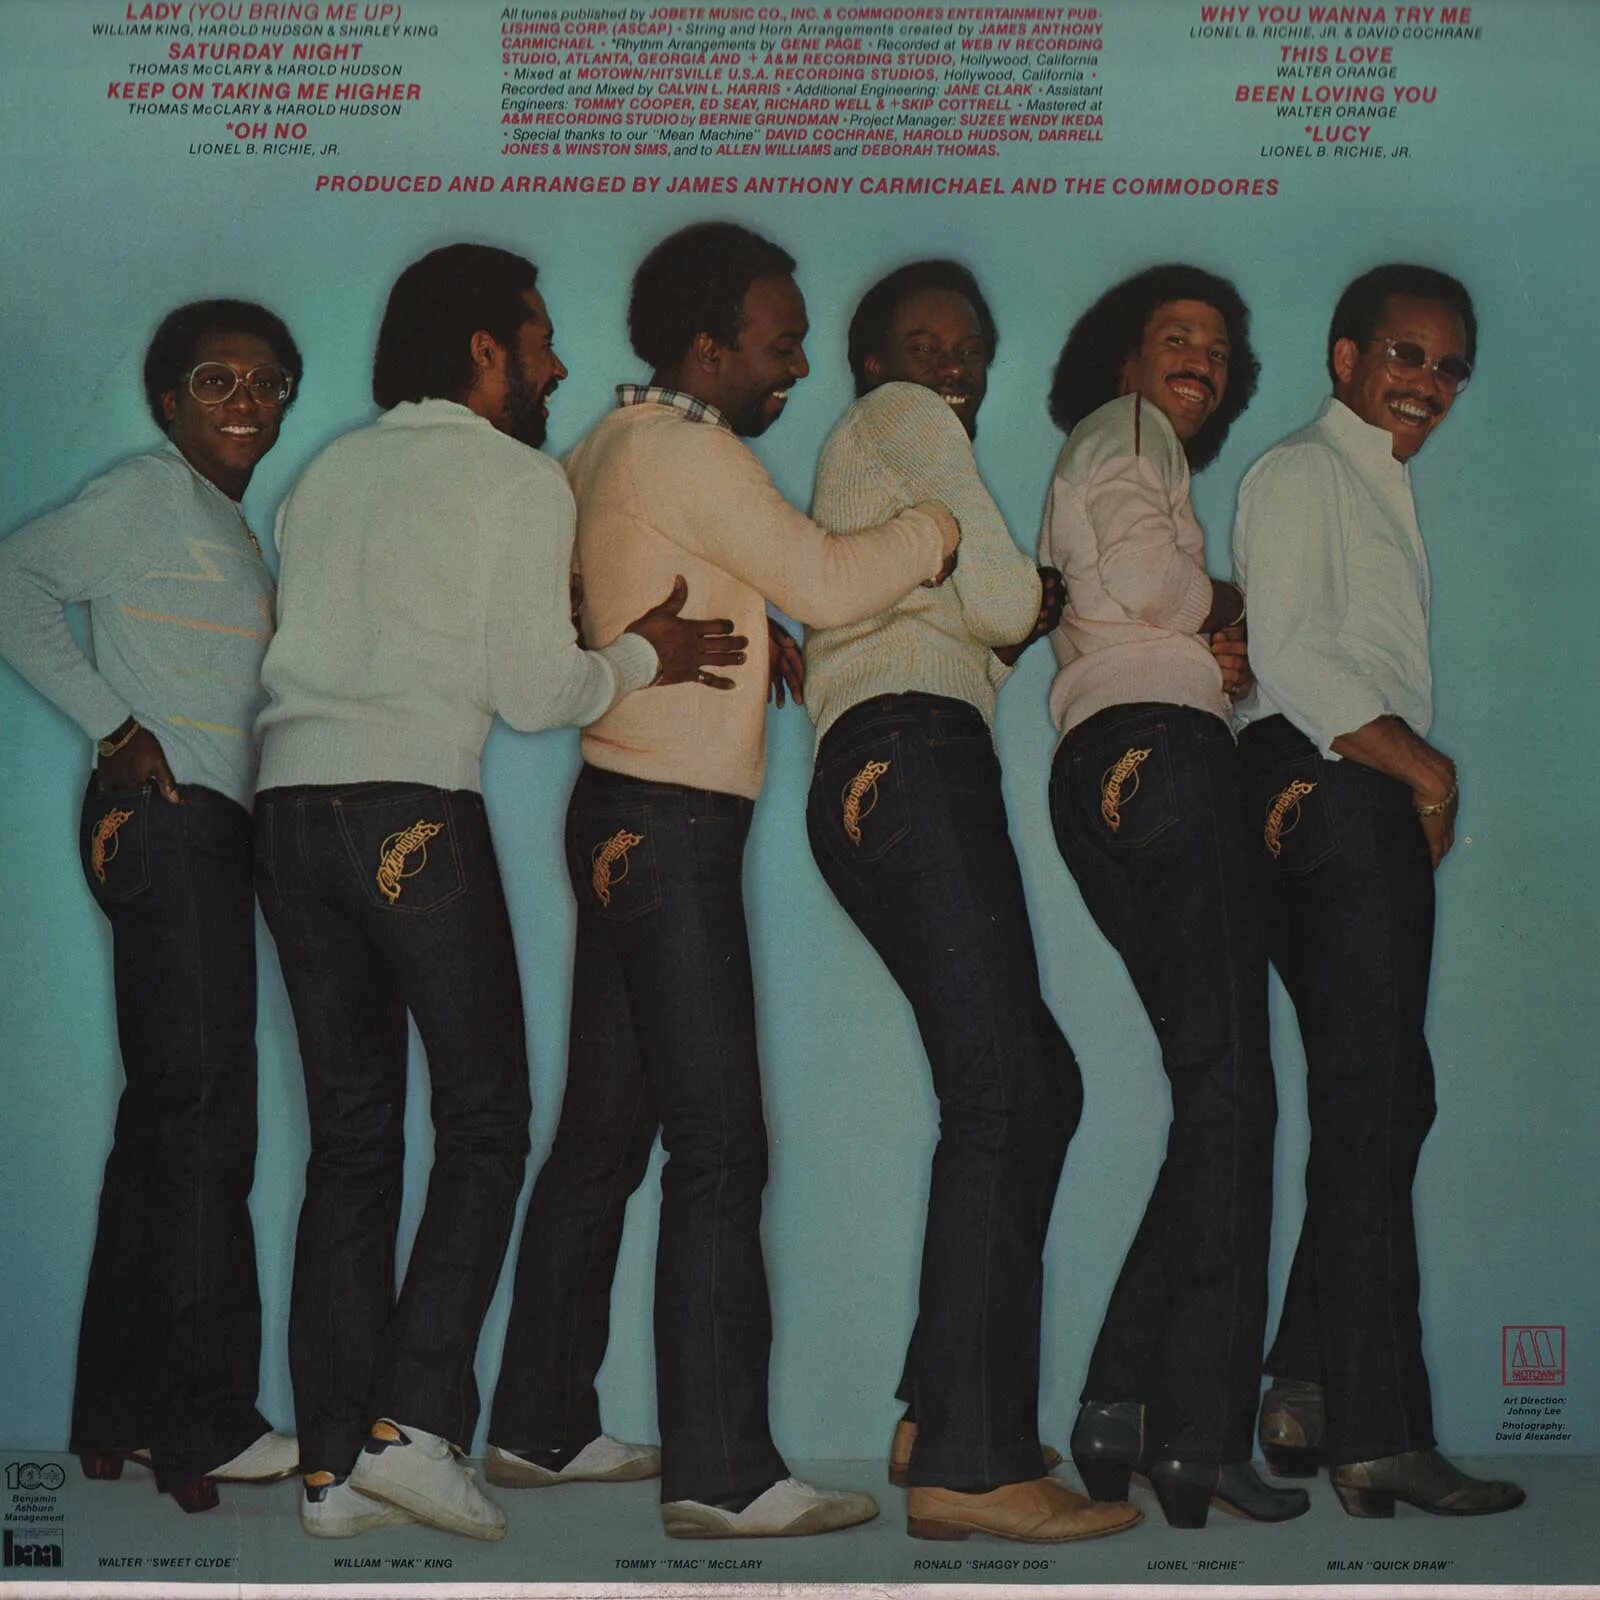 Takes your higher. Commodores - 1981 - in the Pocket. Группа Commodores. Commodores "Nightshift". The Commodores United винил.